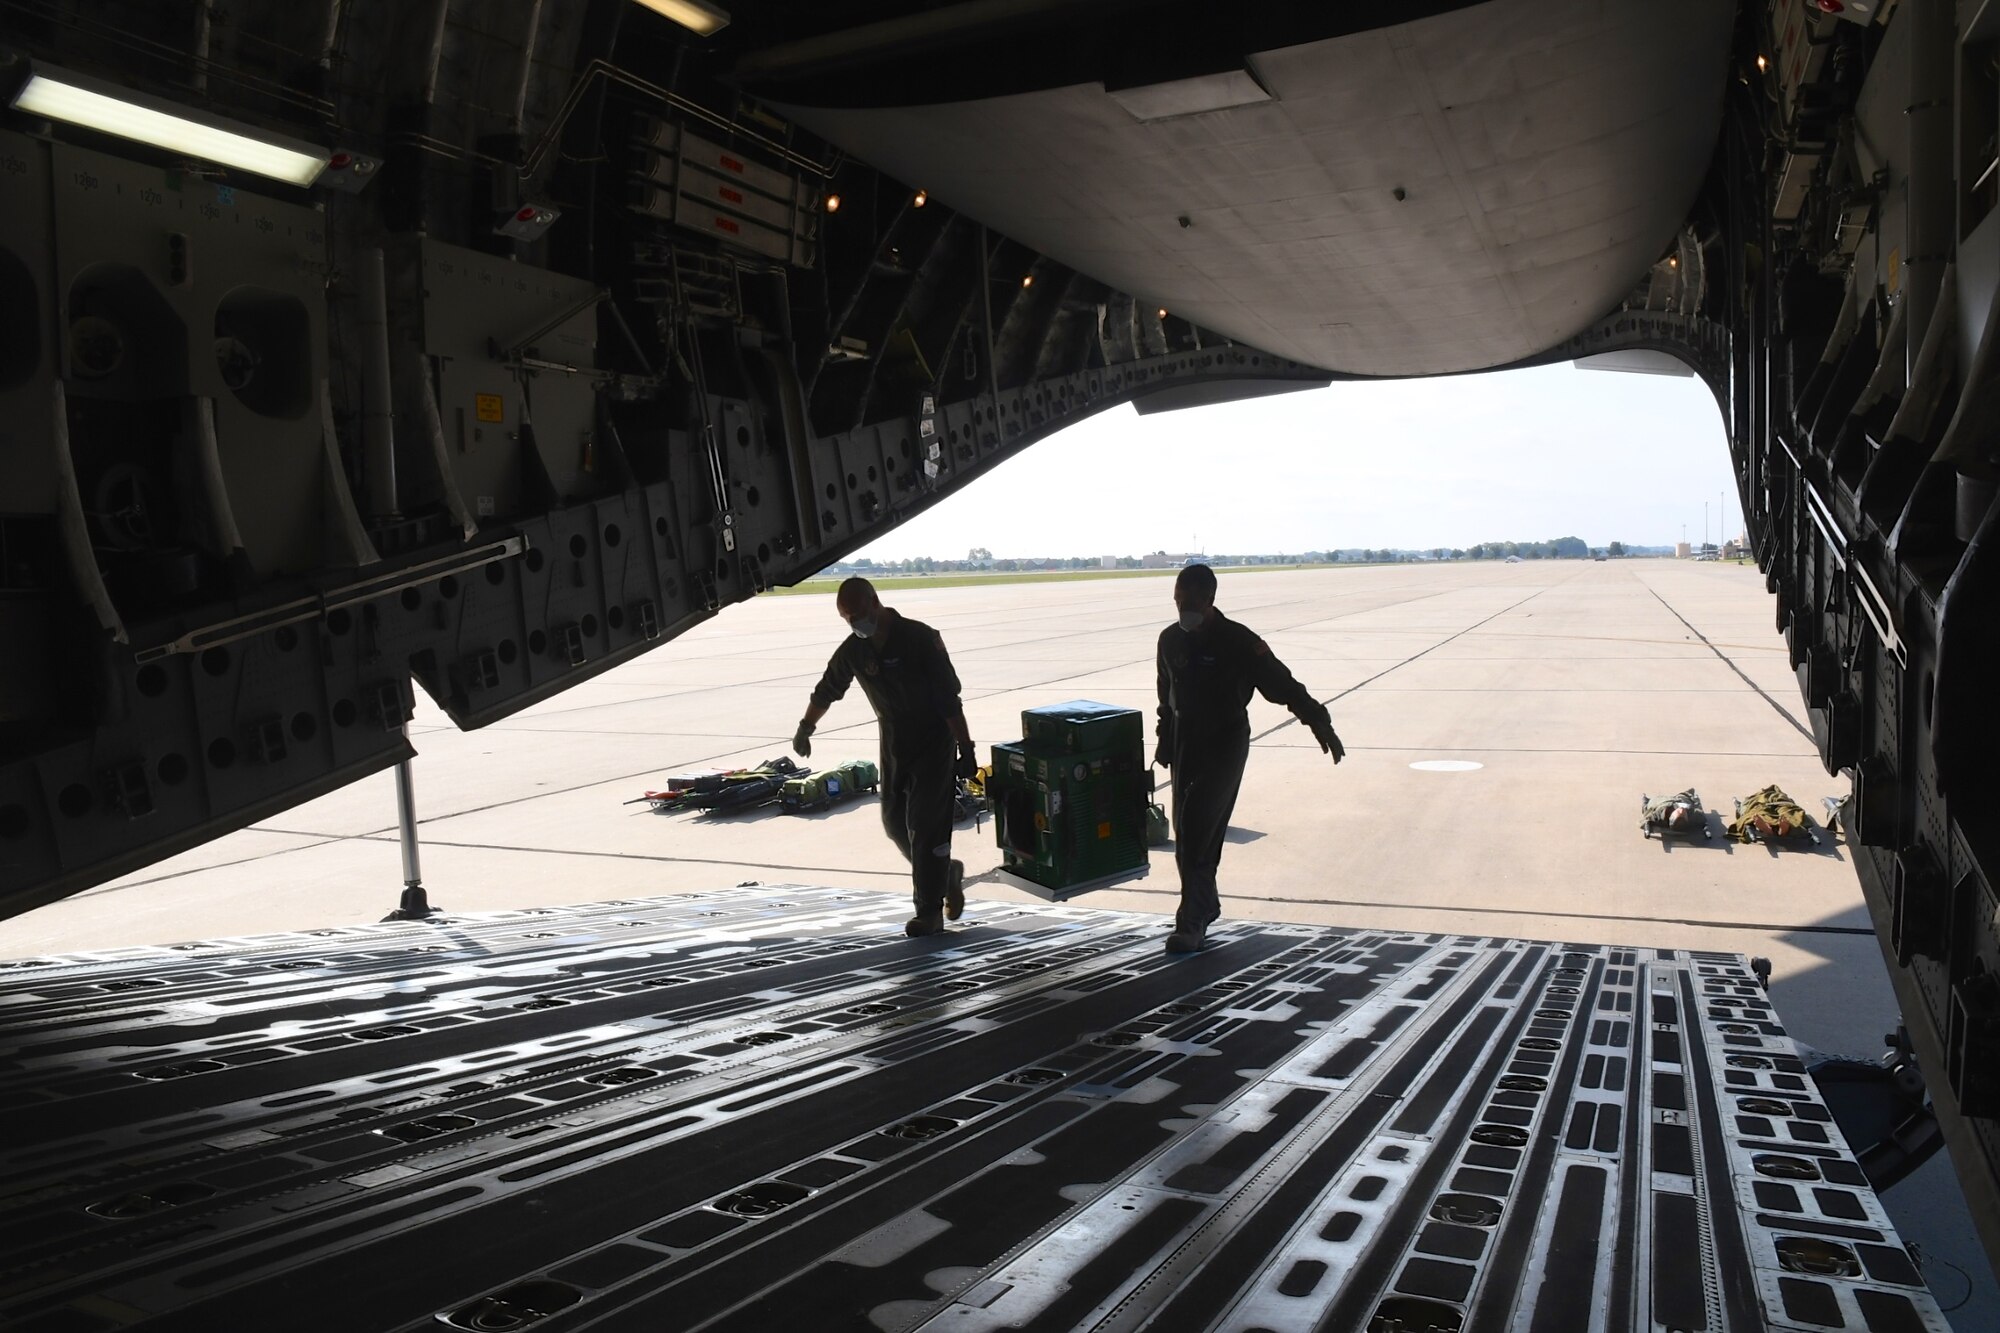 932nd Airlift Wing Aeromedical Evacuation Squadron (AES) personnel carry gear up the ramp as they train with a visiting C-17 aircraft on September 27, 2020, Scott Air Force Base, Ill. The 932nd Airlift Wing's AES worked improving and refining hands on skills at the reserve unit, which included visiting members of the 131st Medical Group from Missouri, and 445th Airlift Wing from Ohio. Airmen worked together on first aid skills and taking care of patients in the air. Simulated patients were moved safely on to the waiting plane. The compact, highly-packed training was designed to improve skills and be ready for any future medical missions. (U.S. Air Force photo by Lt. Col. Stan Paregien)